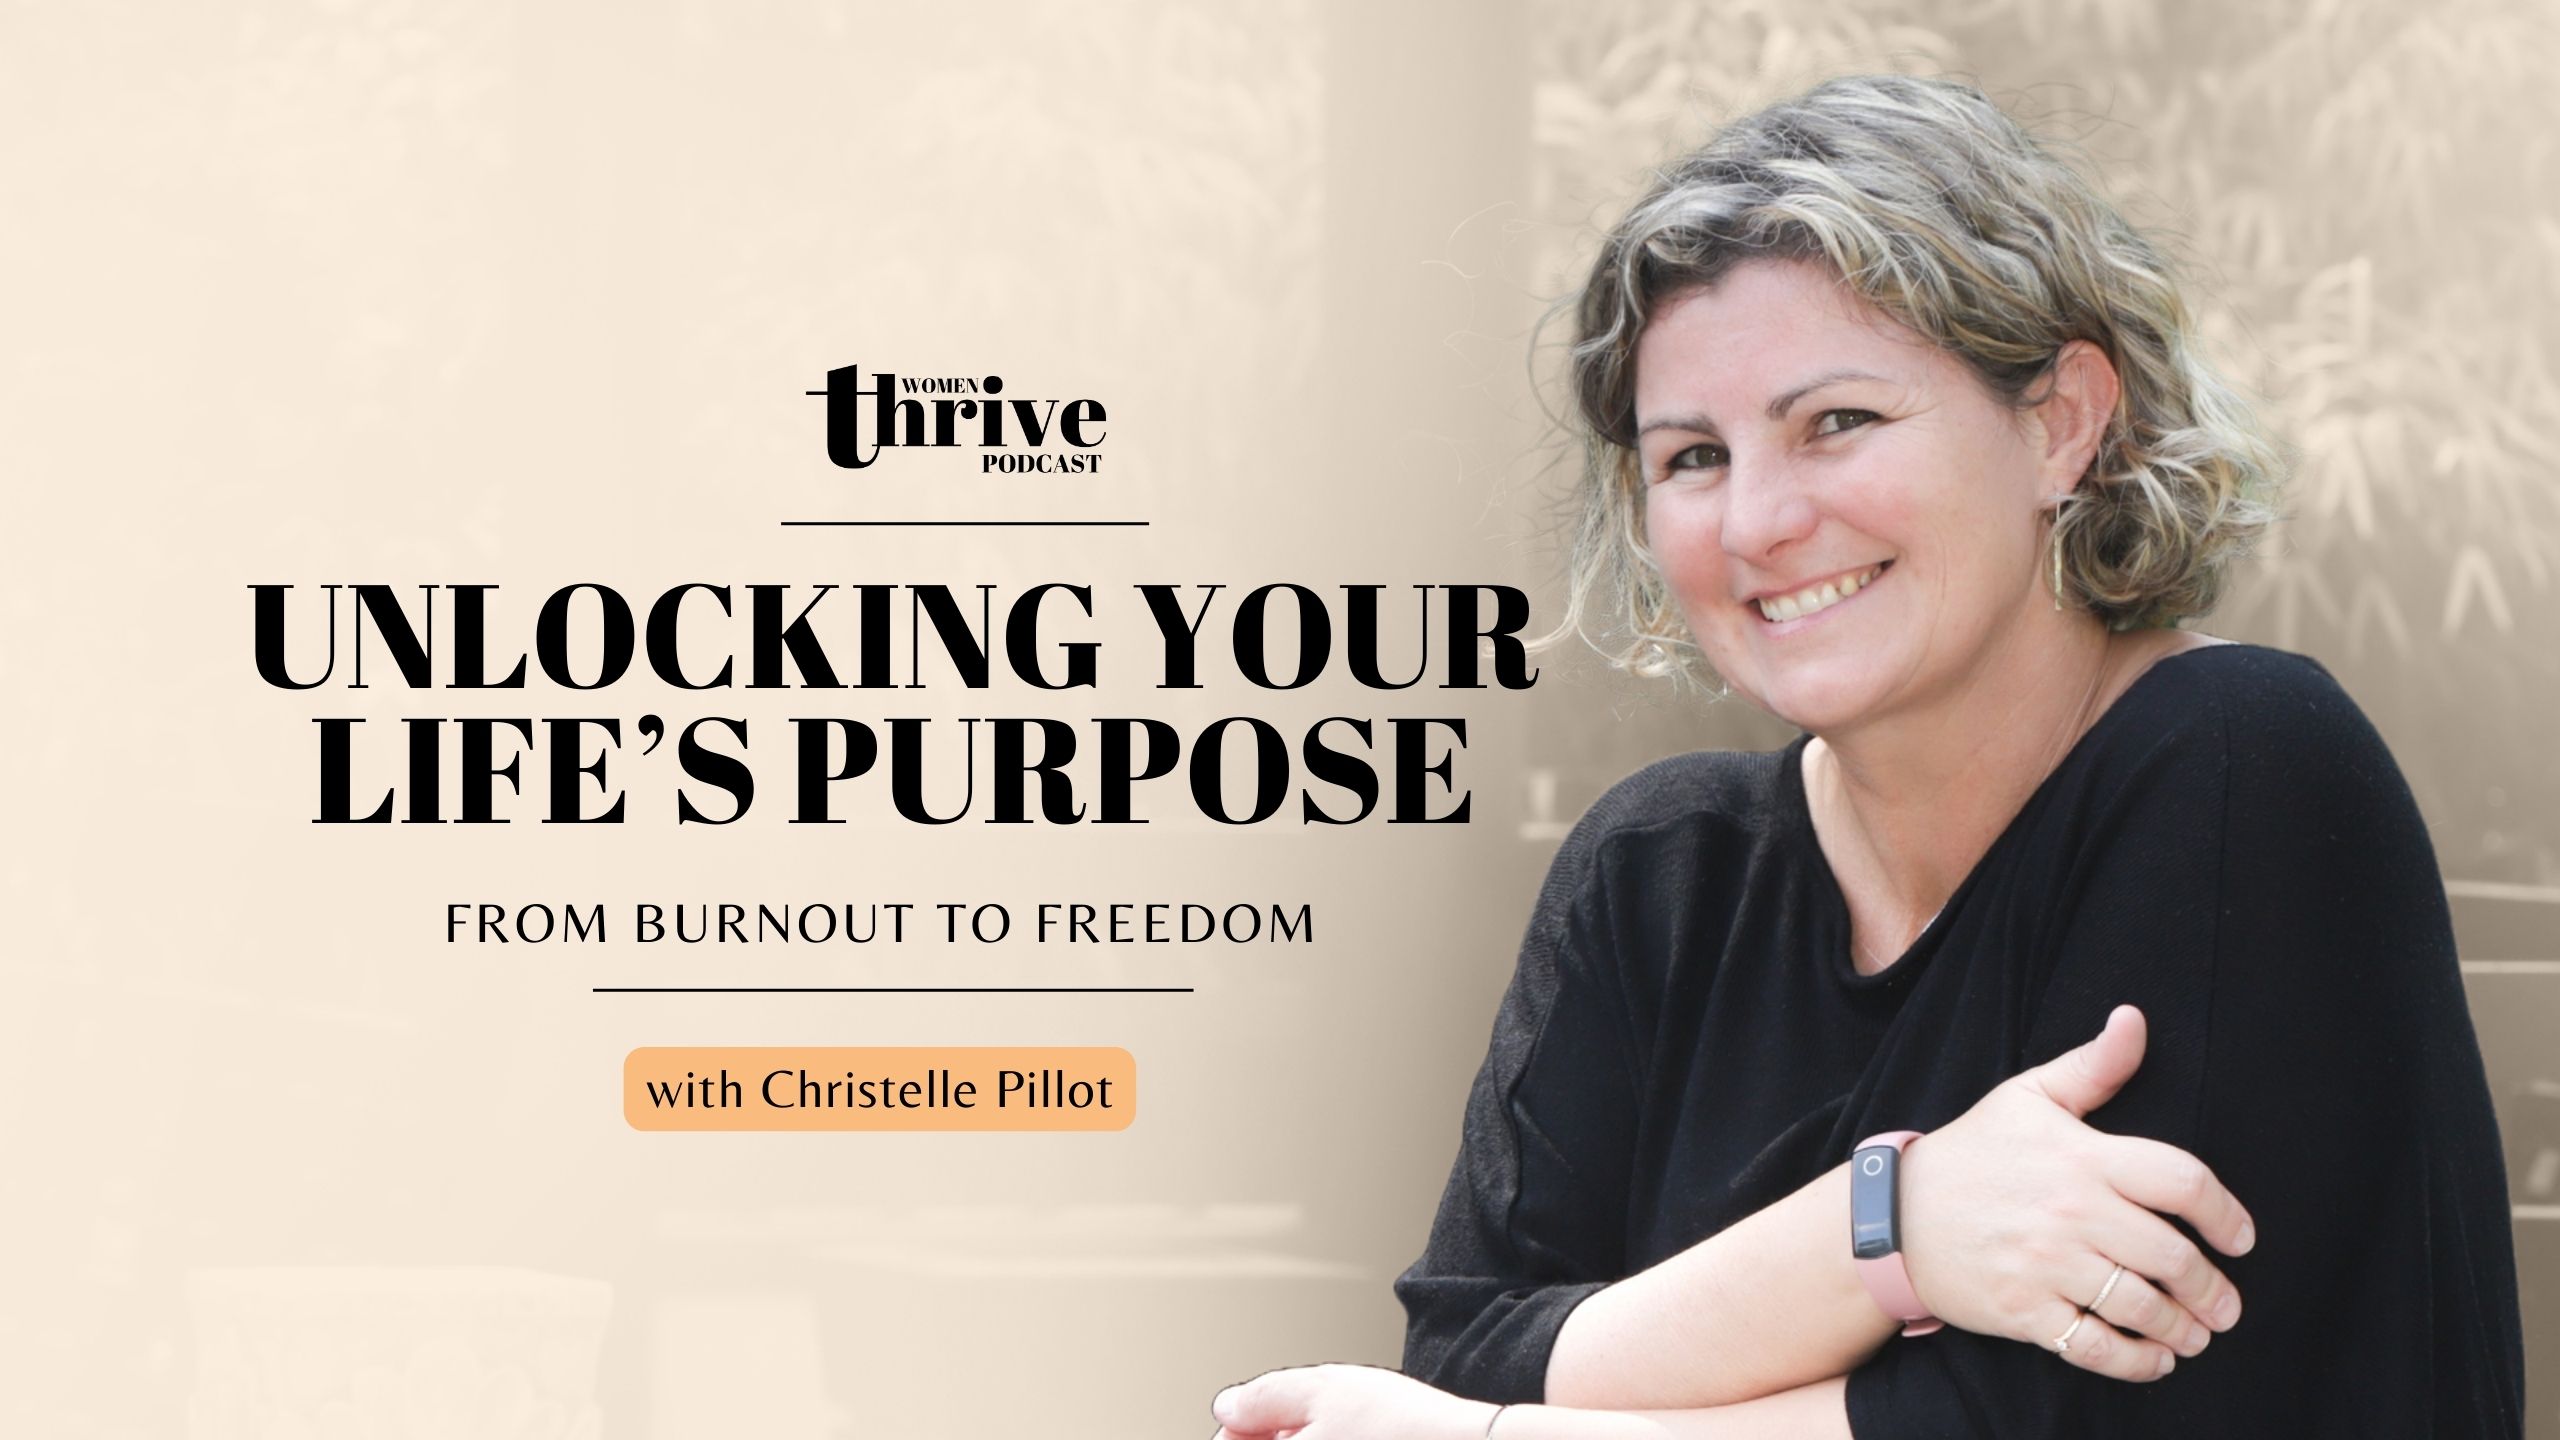 Unlocking Your Life's Purpose: From Burnout to Freedom with Christelle Pillot